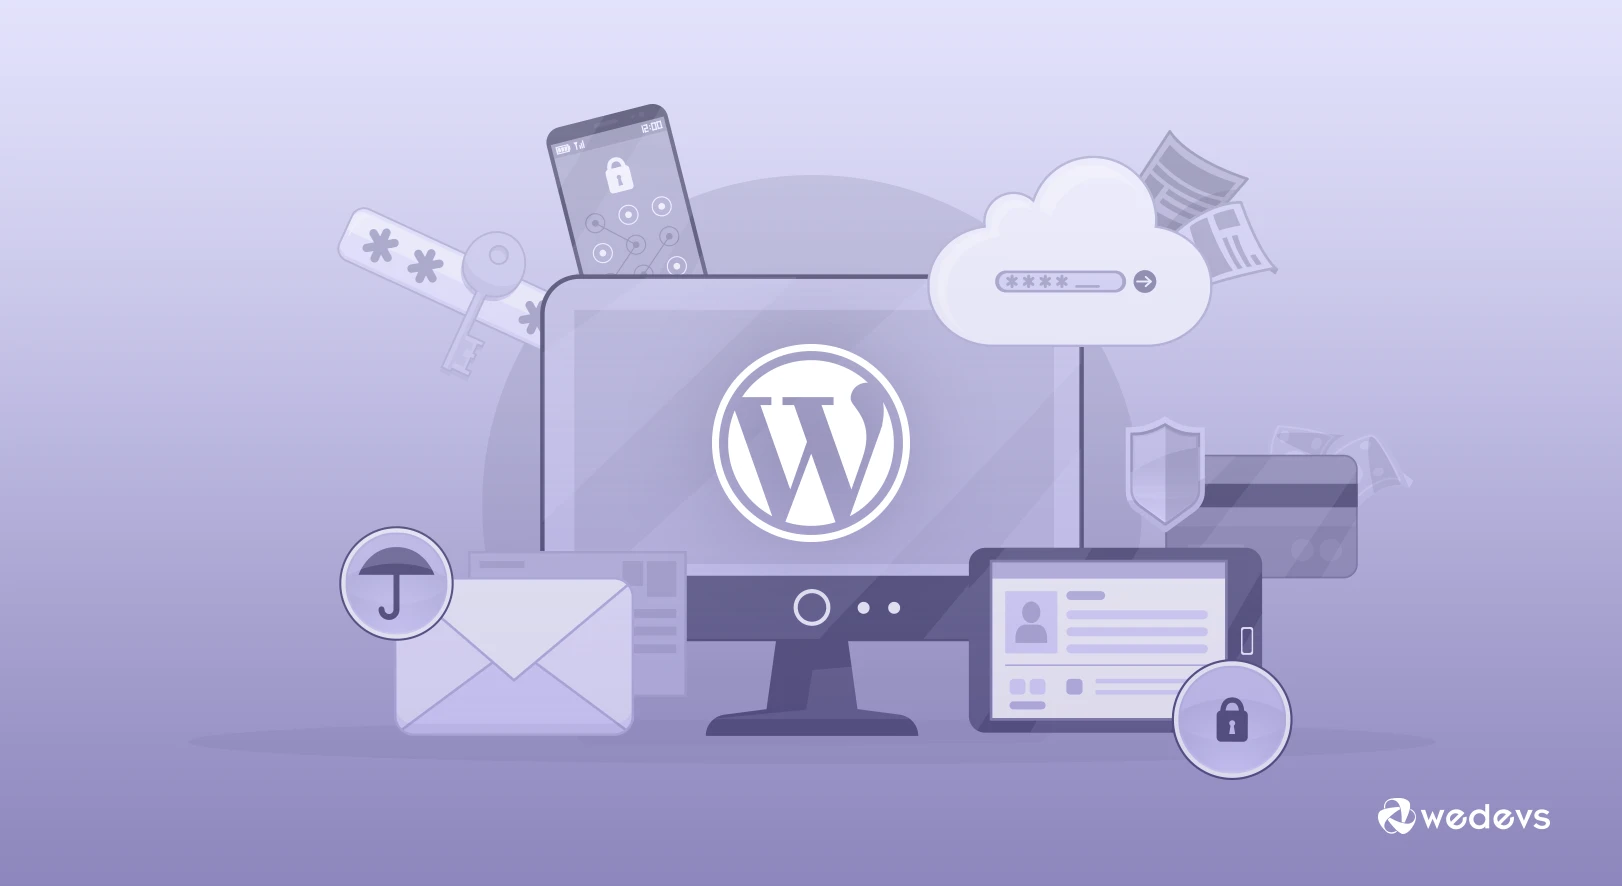 Make WordPress the Best and Most Secure Platform to Power Your Websites